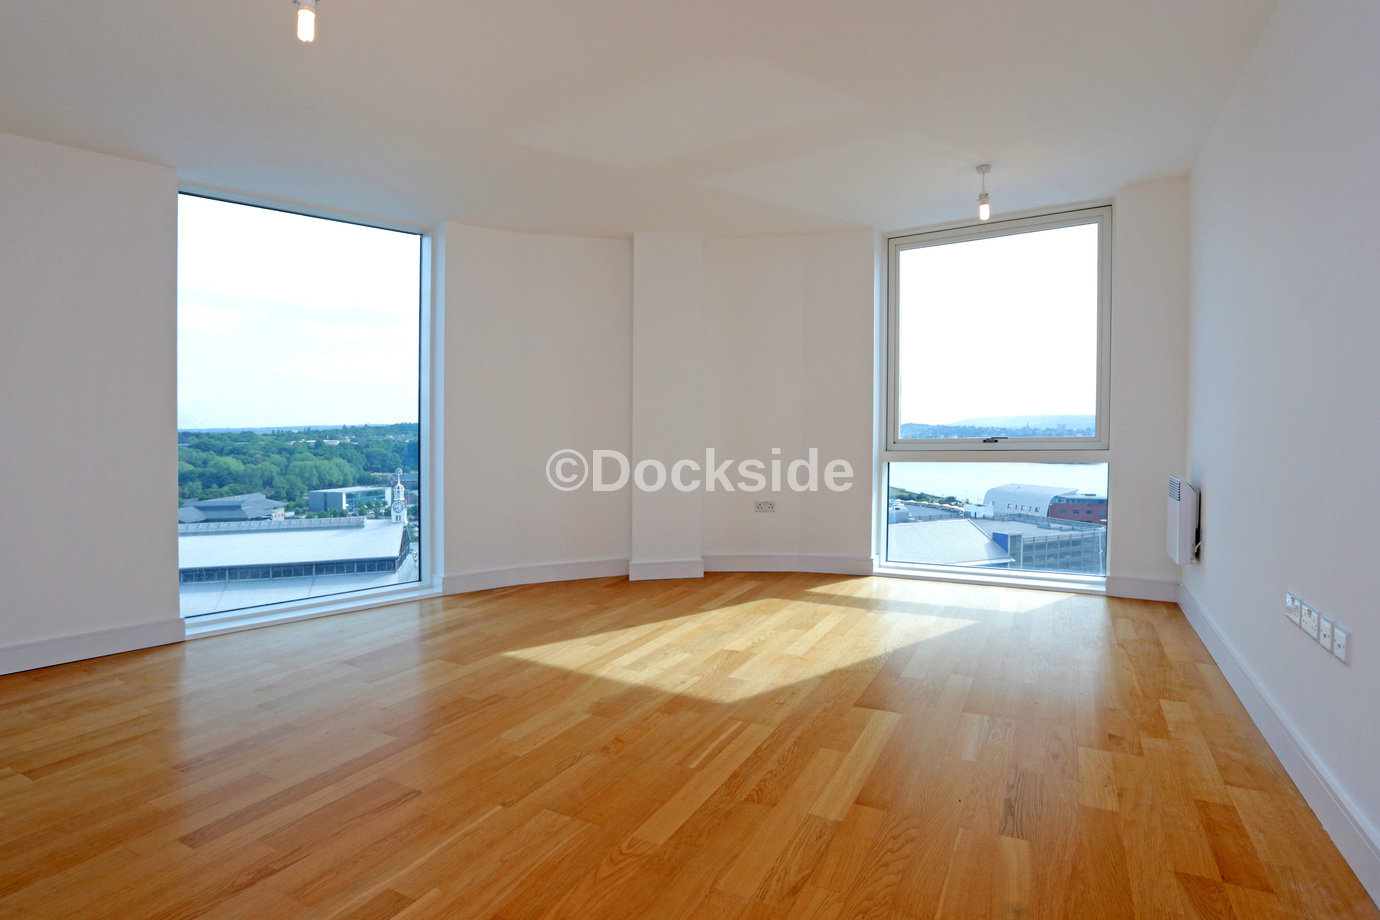 1 bed to rent in Dock Head Road, Chatham Maritime, ME4 